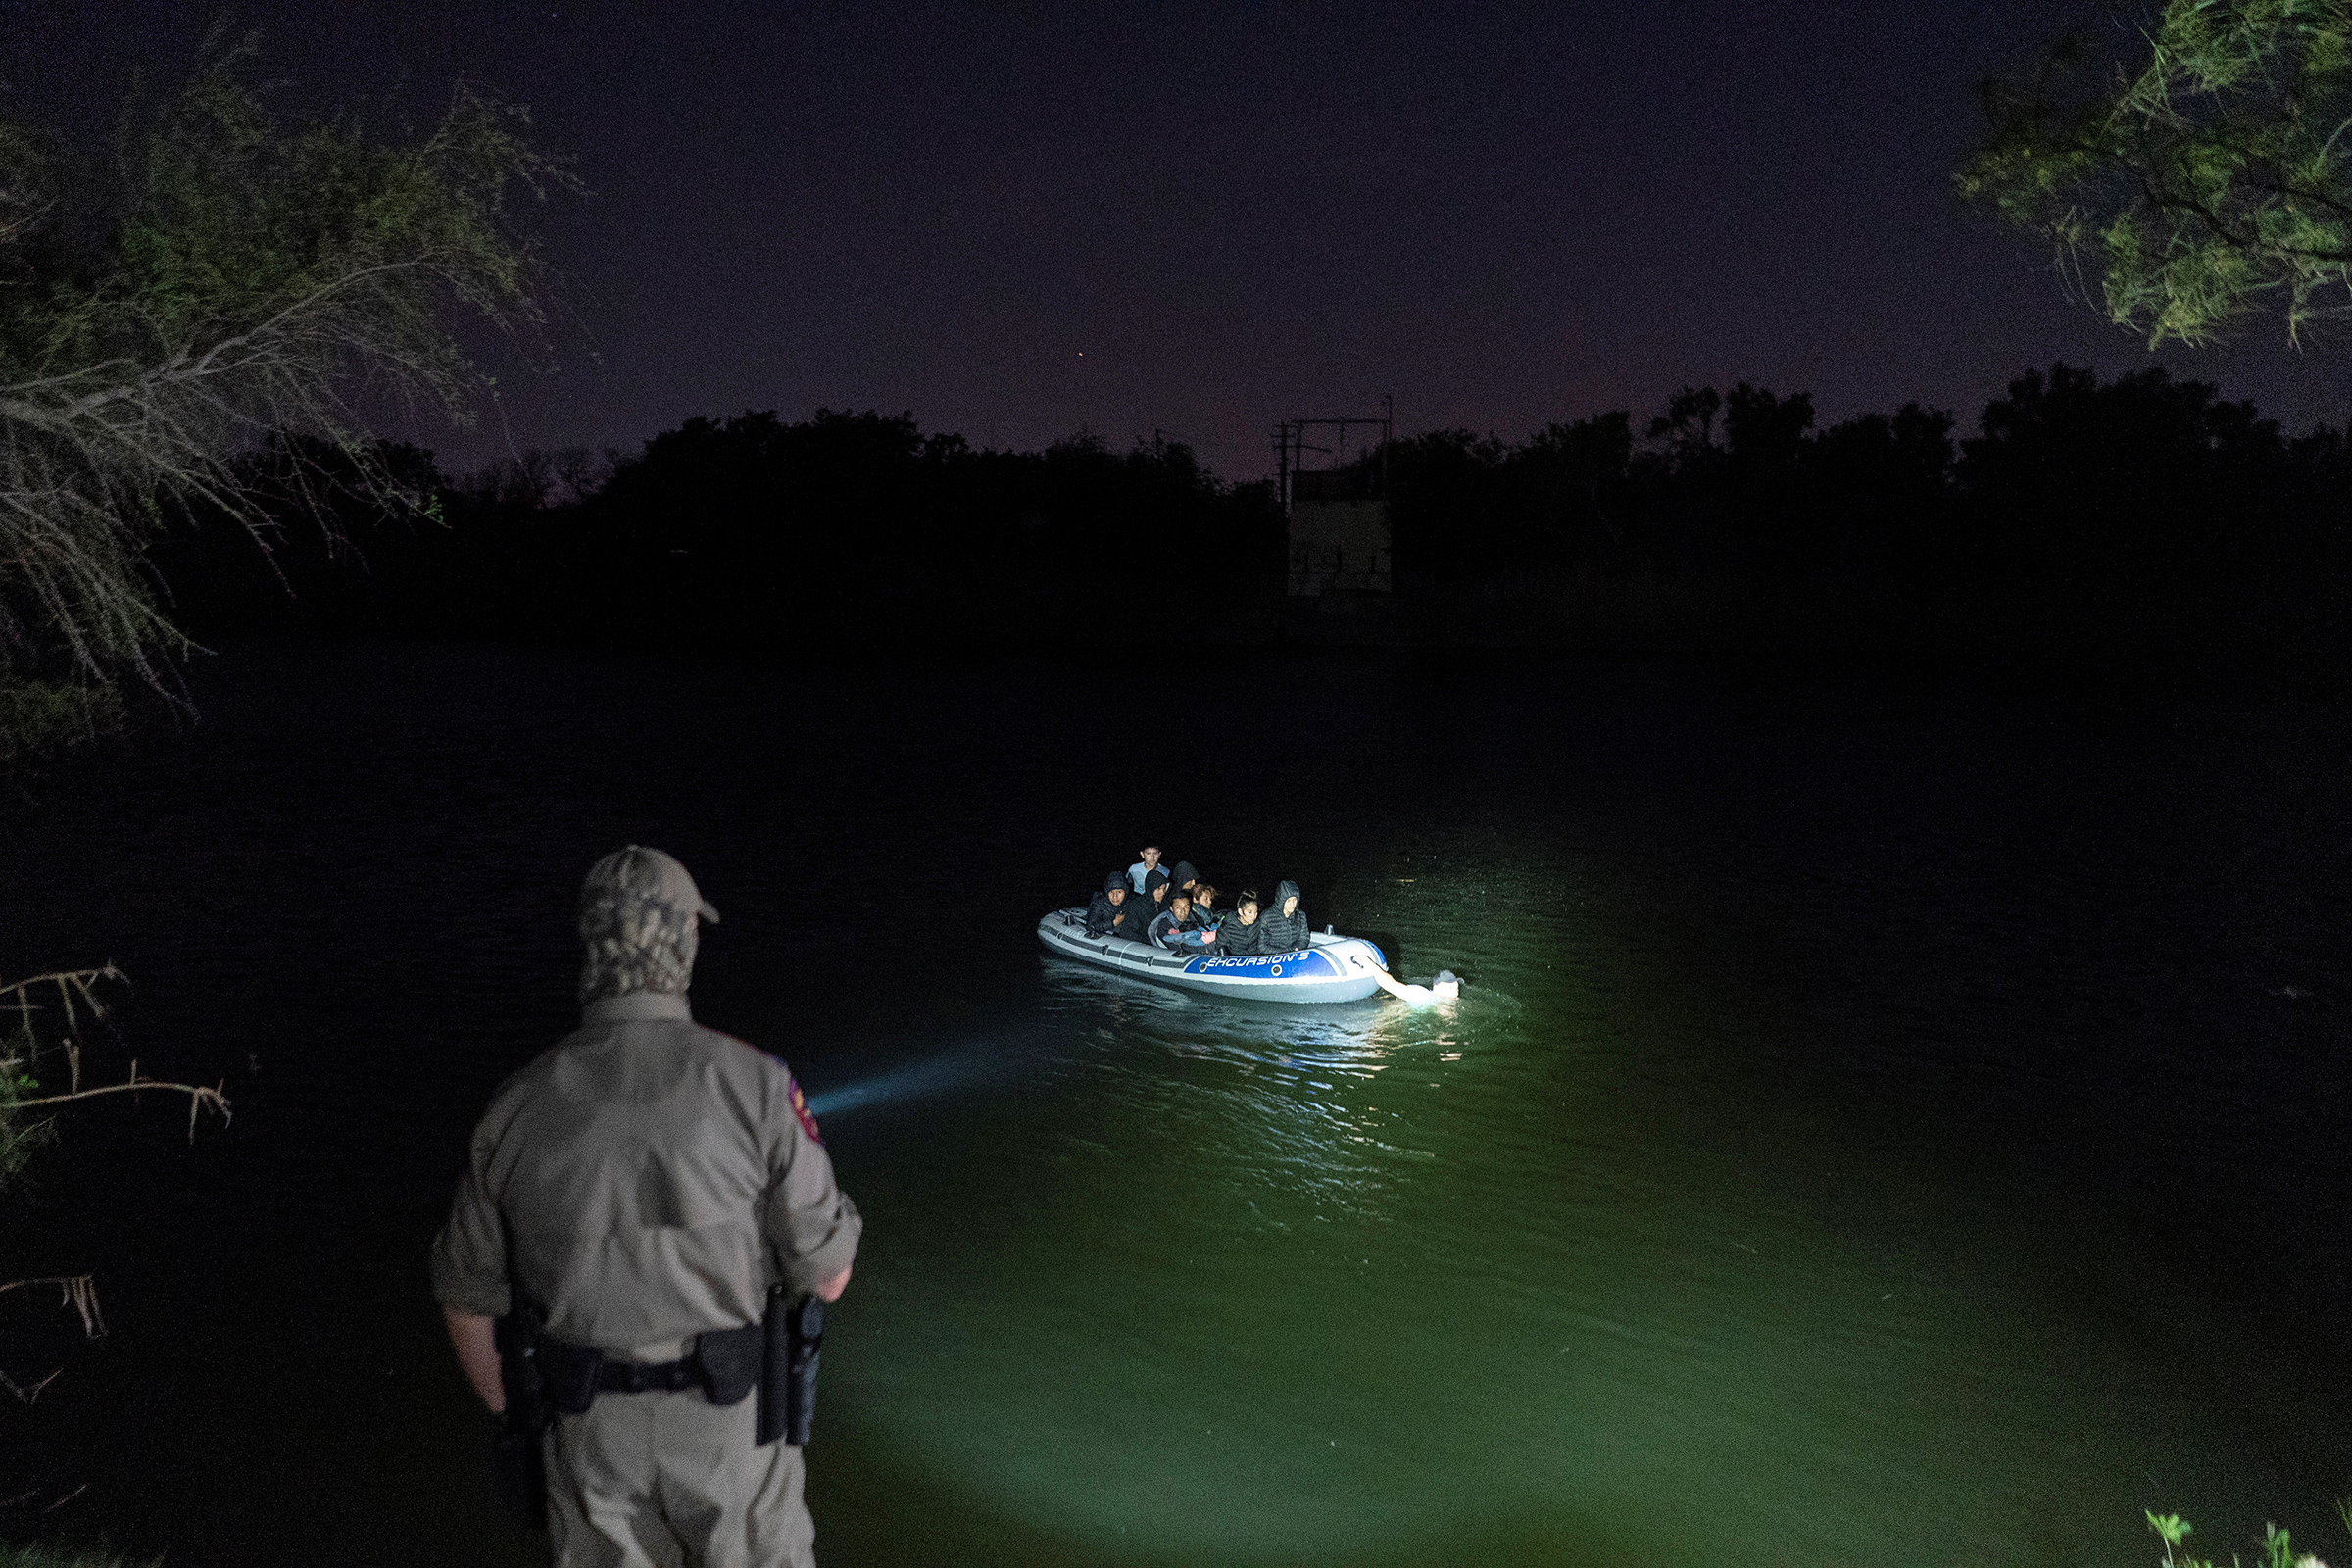 Asylum-seeking migrants' families cross the Rio Grande from Mexico as a Texas State Trooper officer points a flashlight at the inflatable raft in Roma, Texas, on April 8, 2021. The raft later turned back to the Mexican side and did not land on the U.S. side of the river. (Go Nakamura—Reuters)